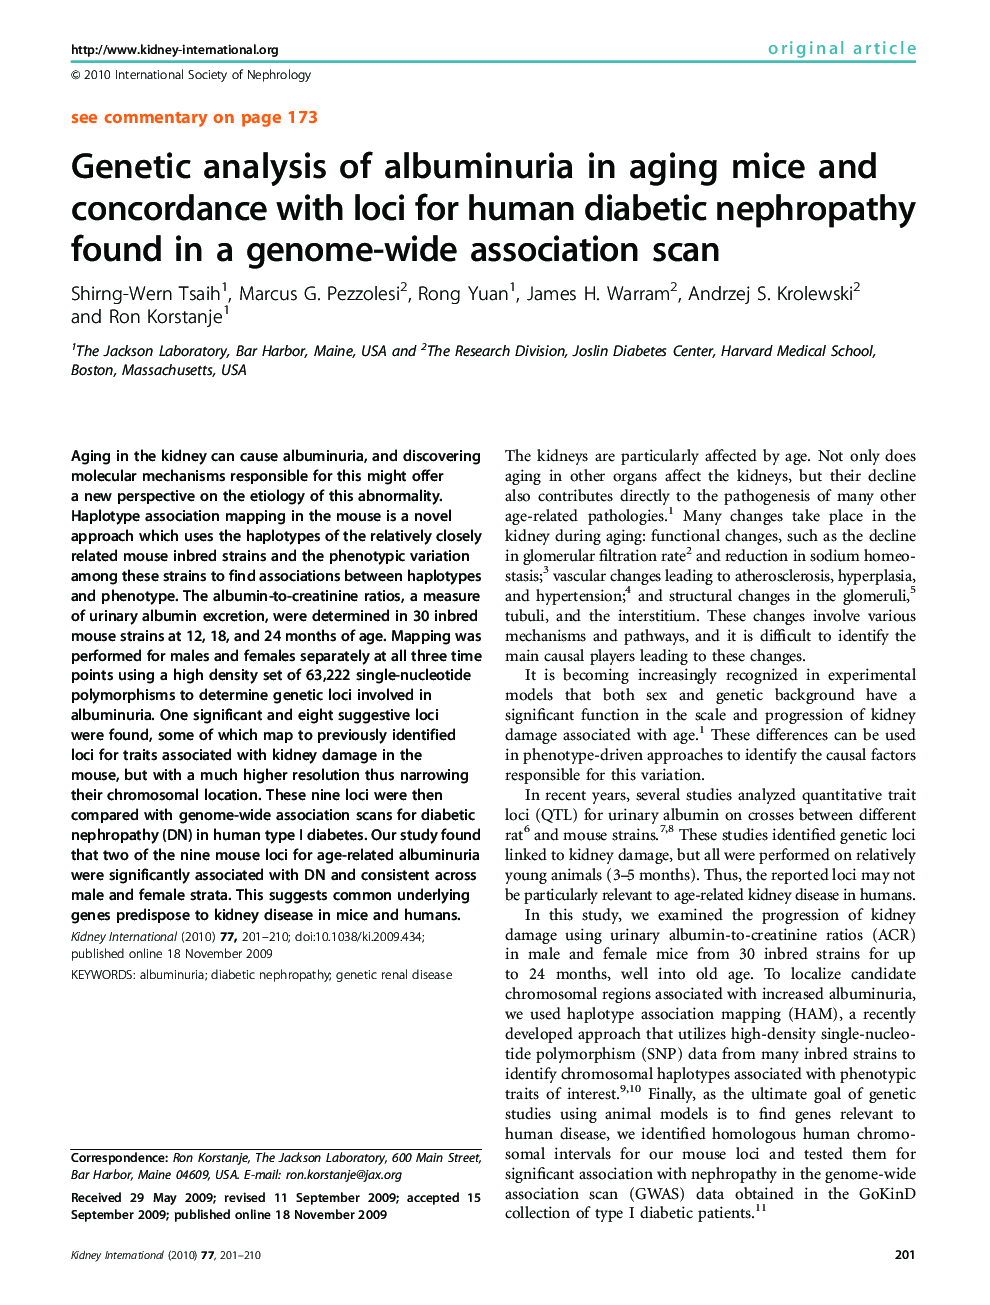 Genetic analysis of albuminuria in aging mice and concordance with loci for human diabetic nephropathy found in a genome-wide association scan 